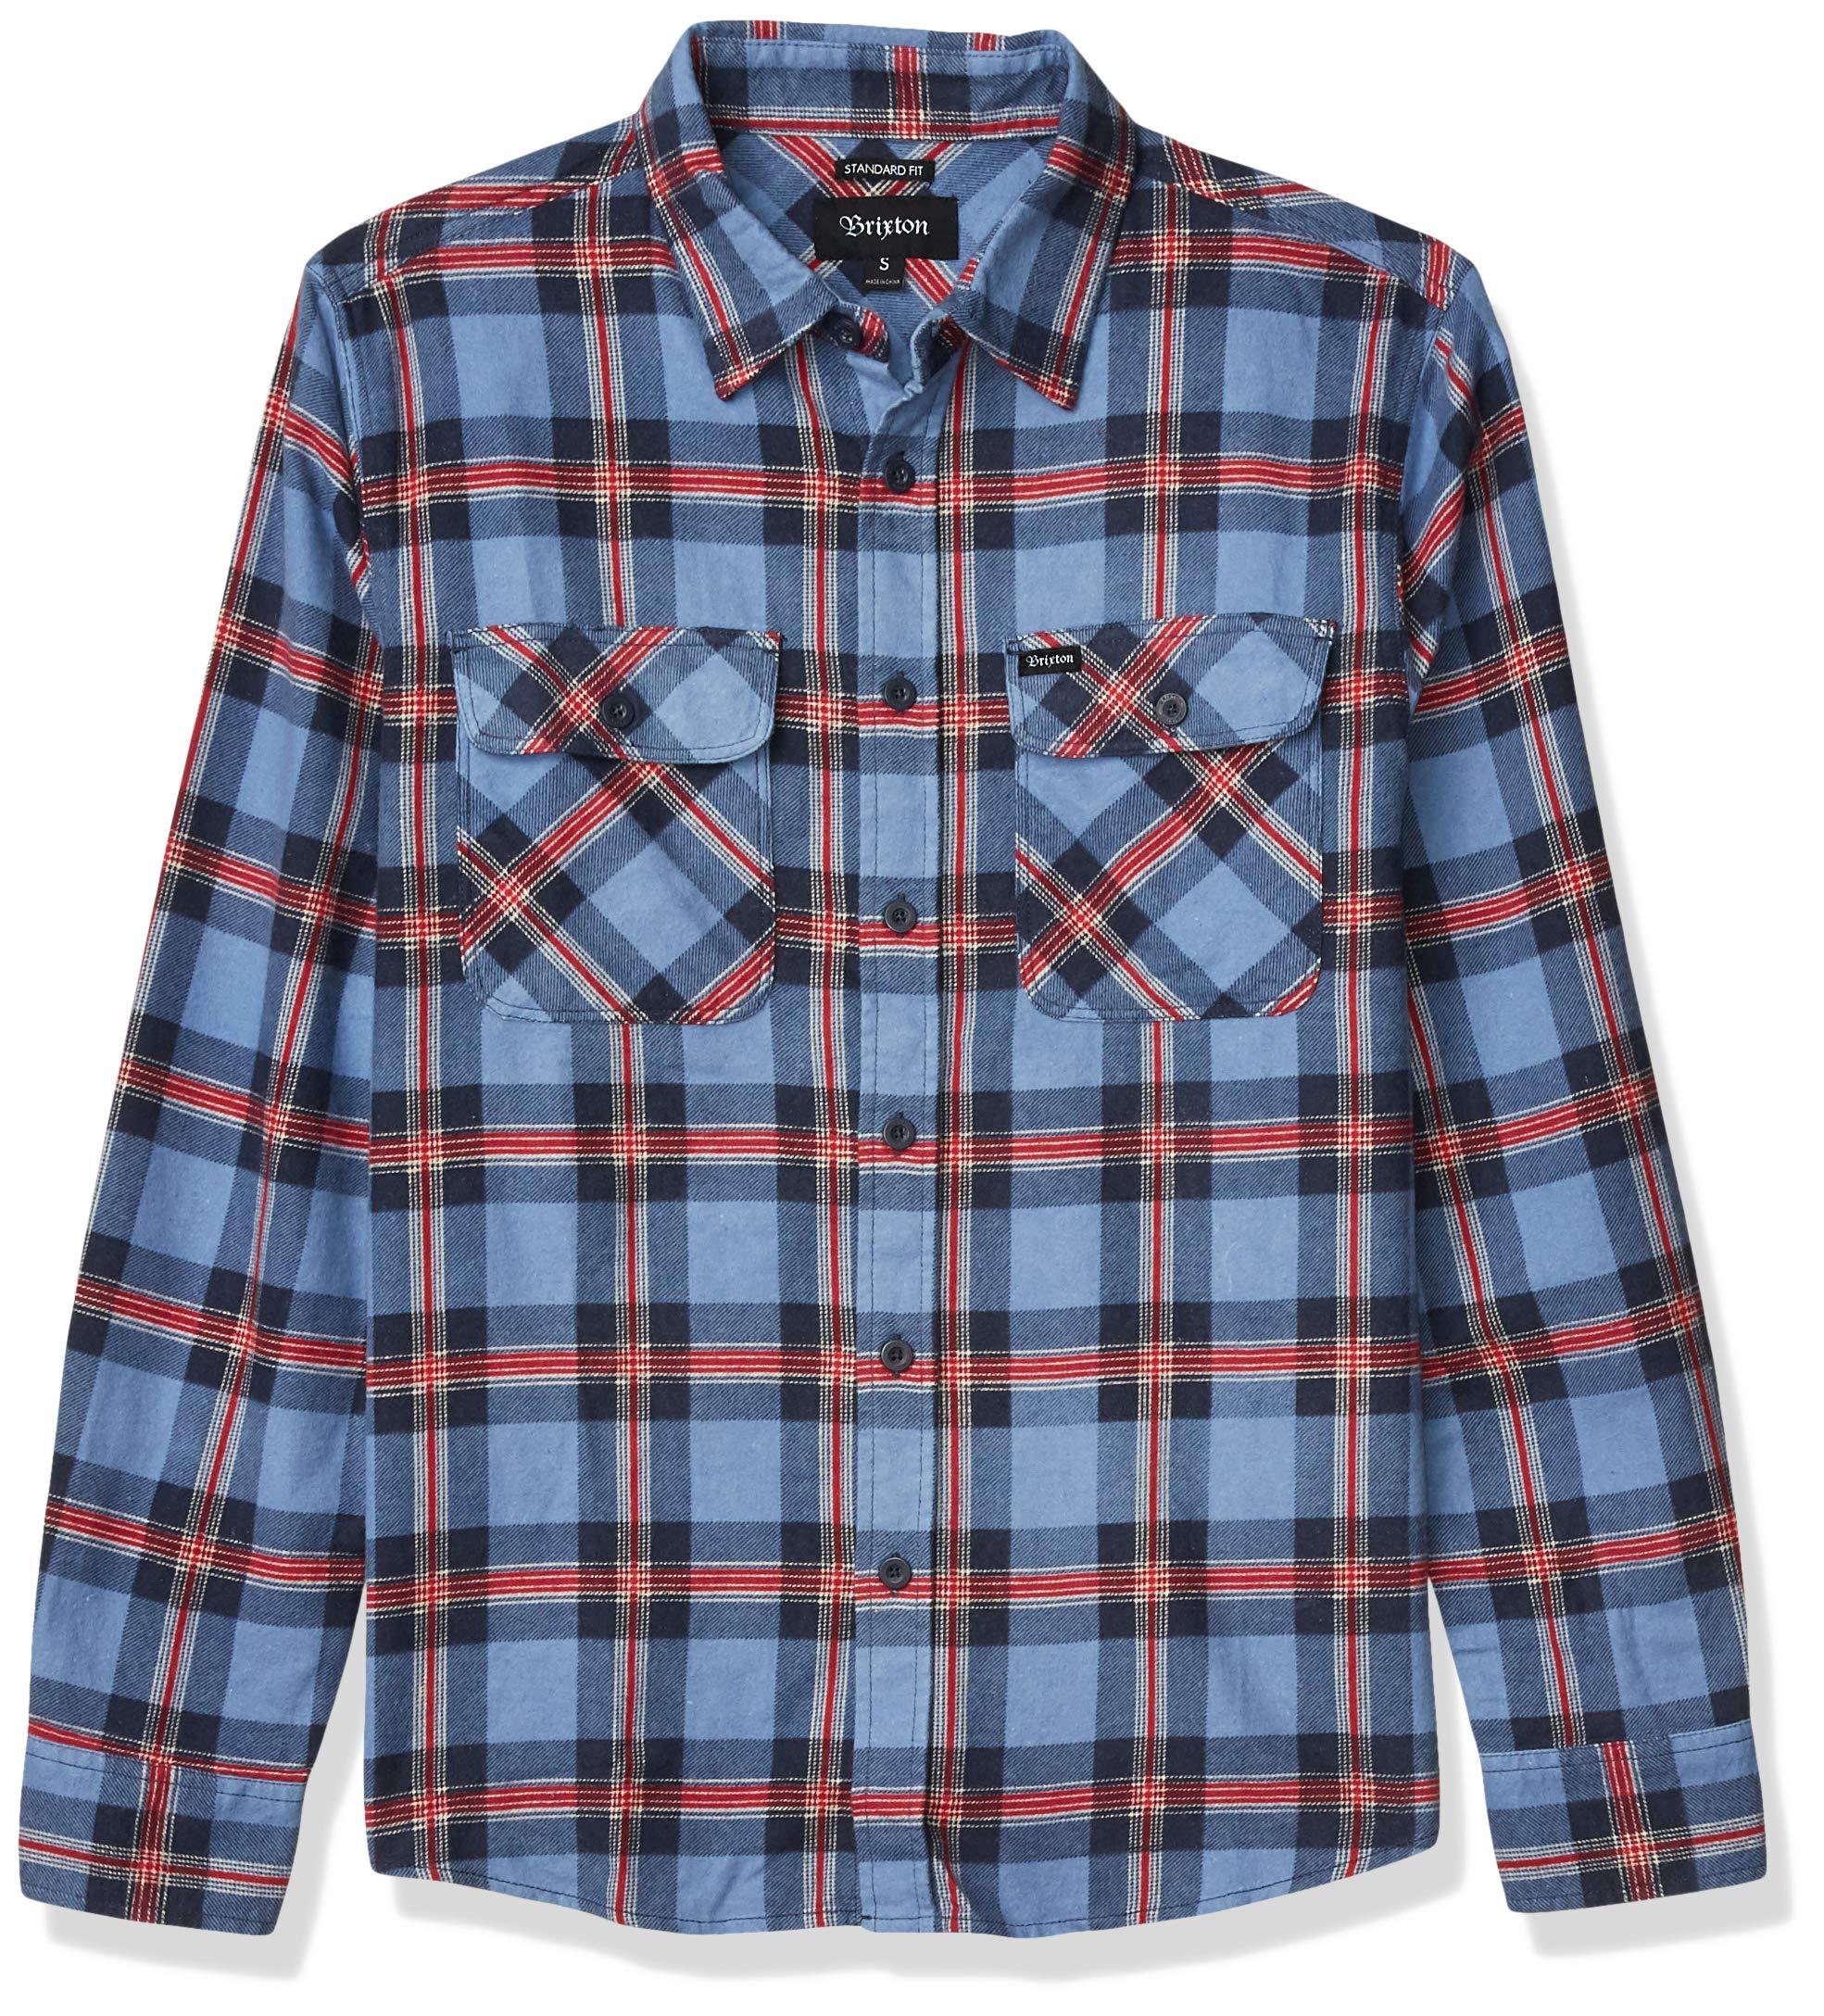 Brixton Bowery Lw L/s Flannel in Blue for Men - Lyst